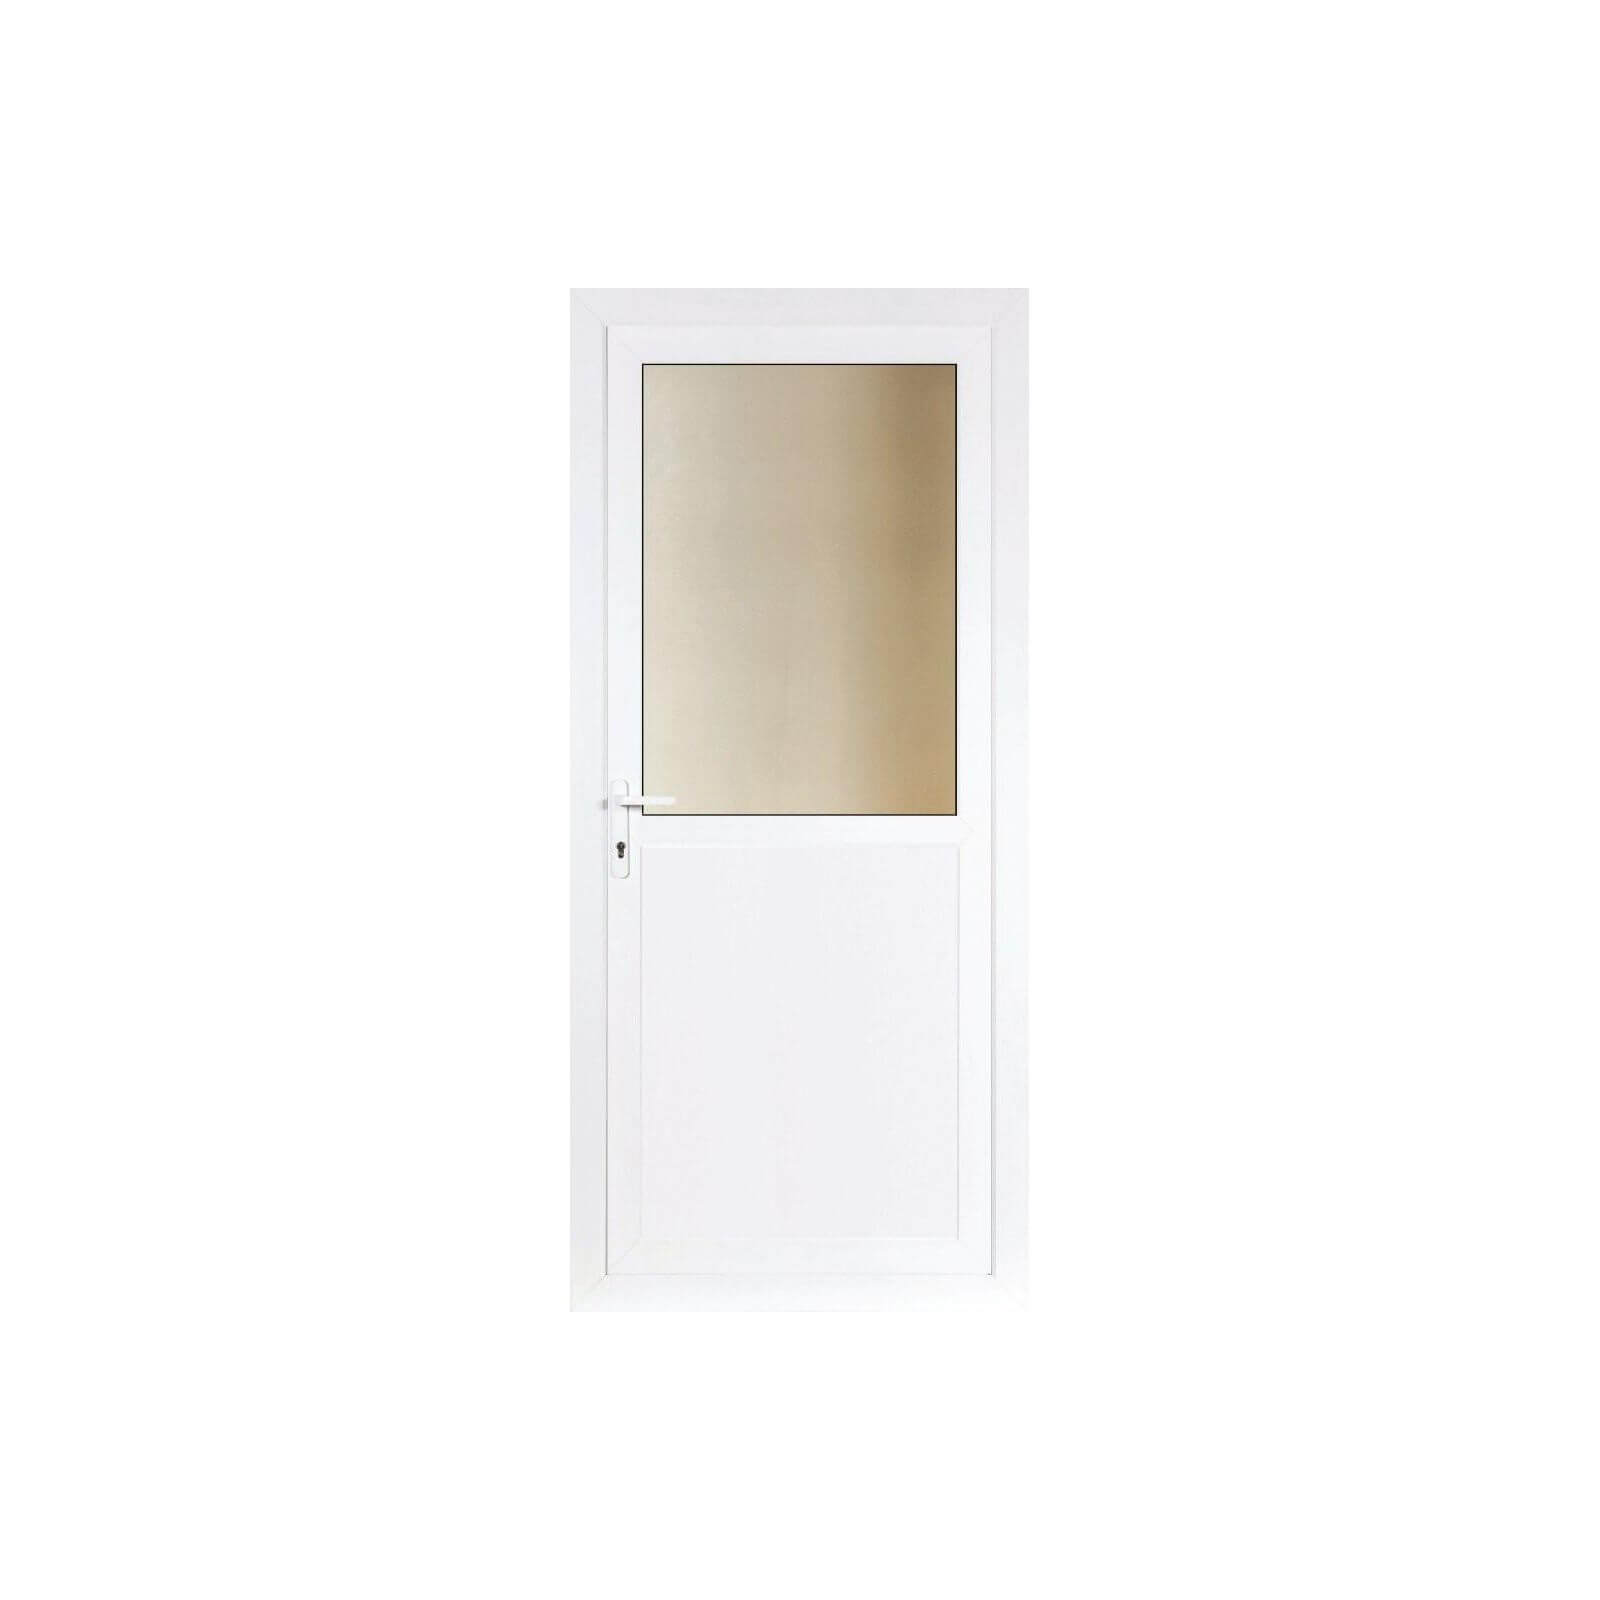 Brighton Rear Door Set - Obscure Half Glazed Right Hand Hung - 840mm Wide 2085mm High